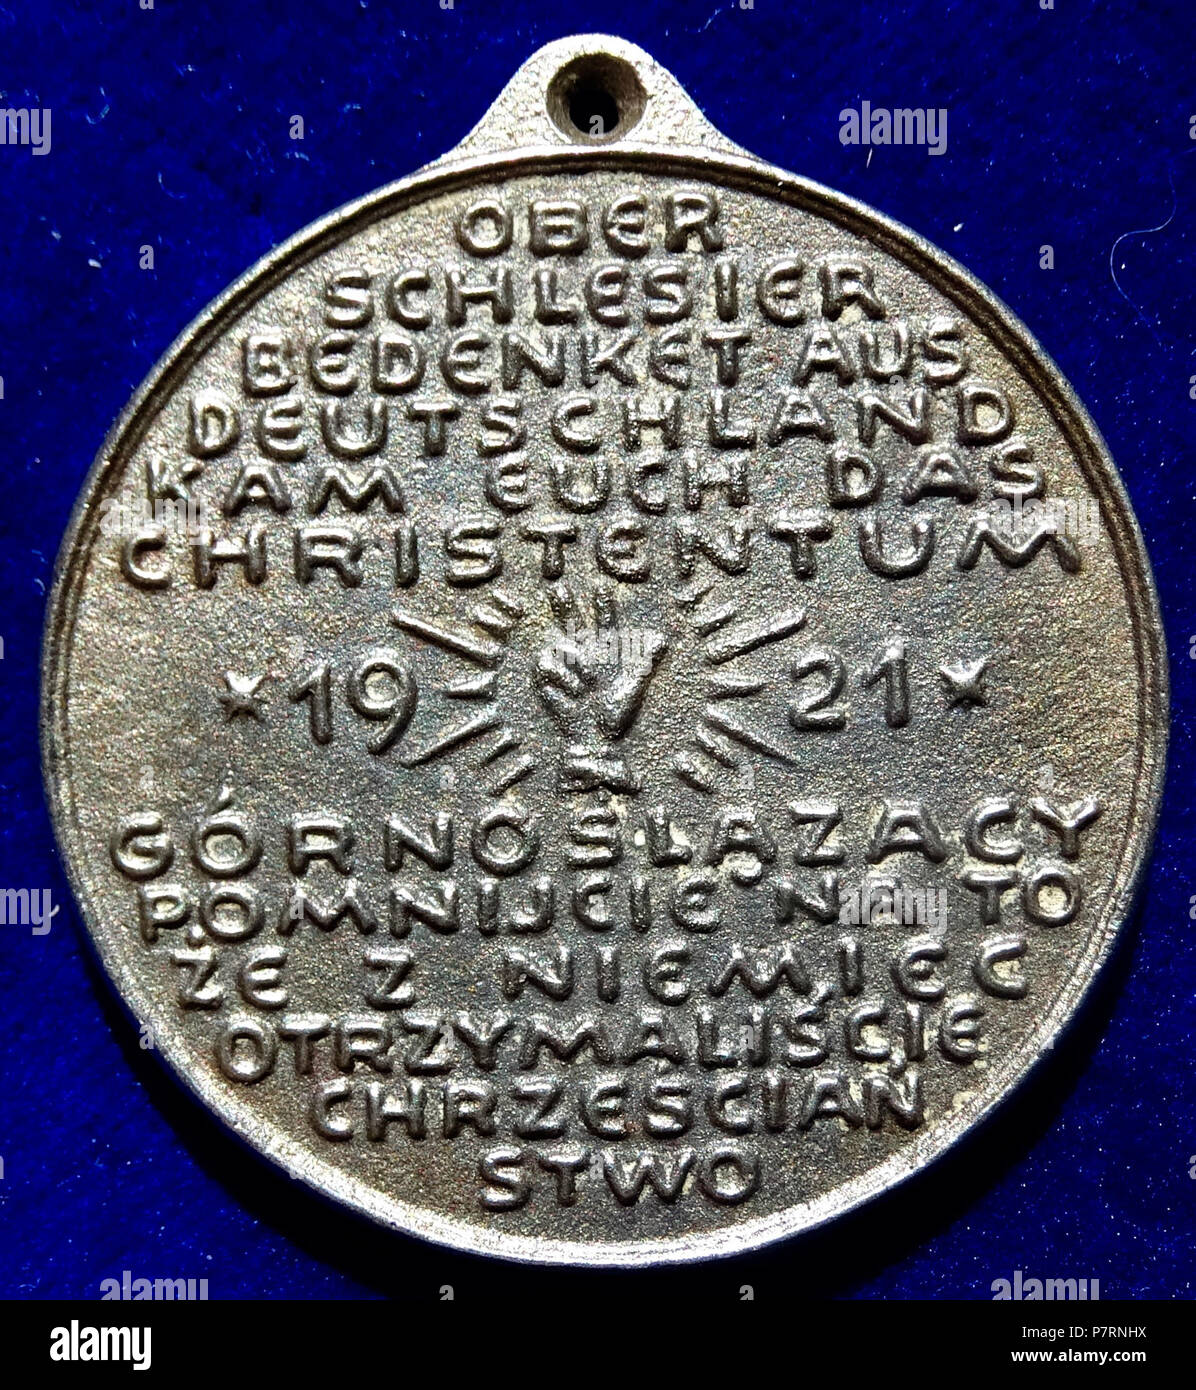 N/A. N/A 382 Upper Silesia Plebiscite 1921 Fe- Campaign Medal of the pro- German Side (reverse) Stock Photo